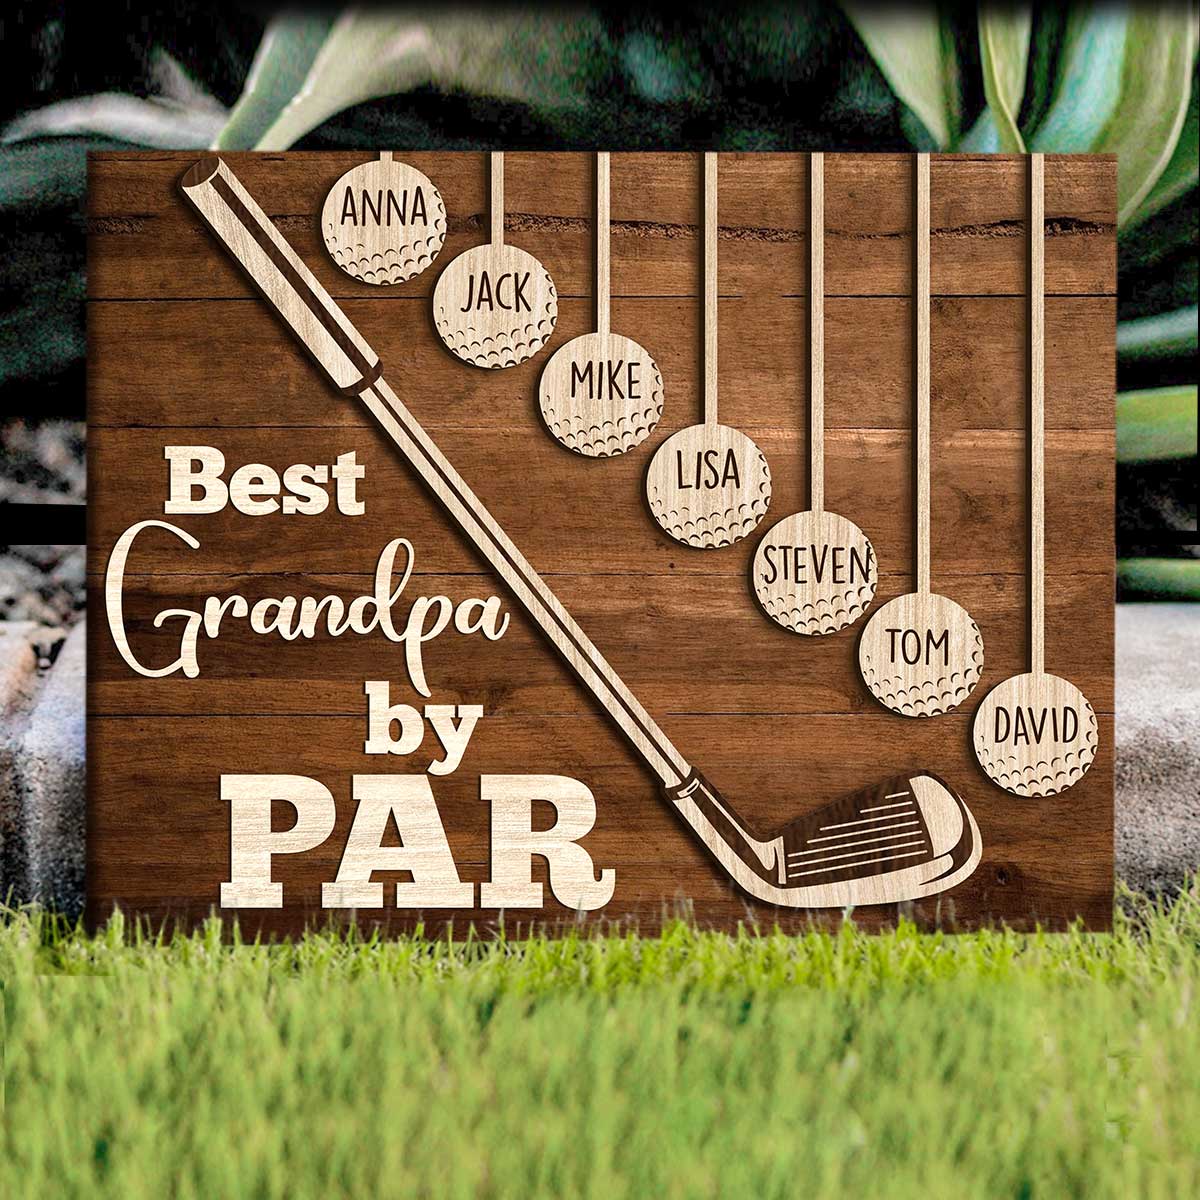 60 PCS Christmas Dad Golf Gifts for Men, 3-1/4 inch Funny Sayings Wooden  Golf Tees with Warm Words Golfing Gifts Presents for Dad Grandpa  Grandfather Burlywood